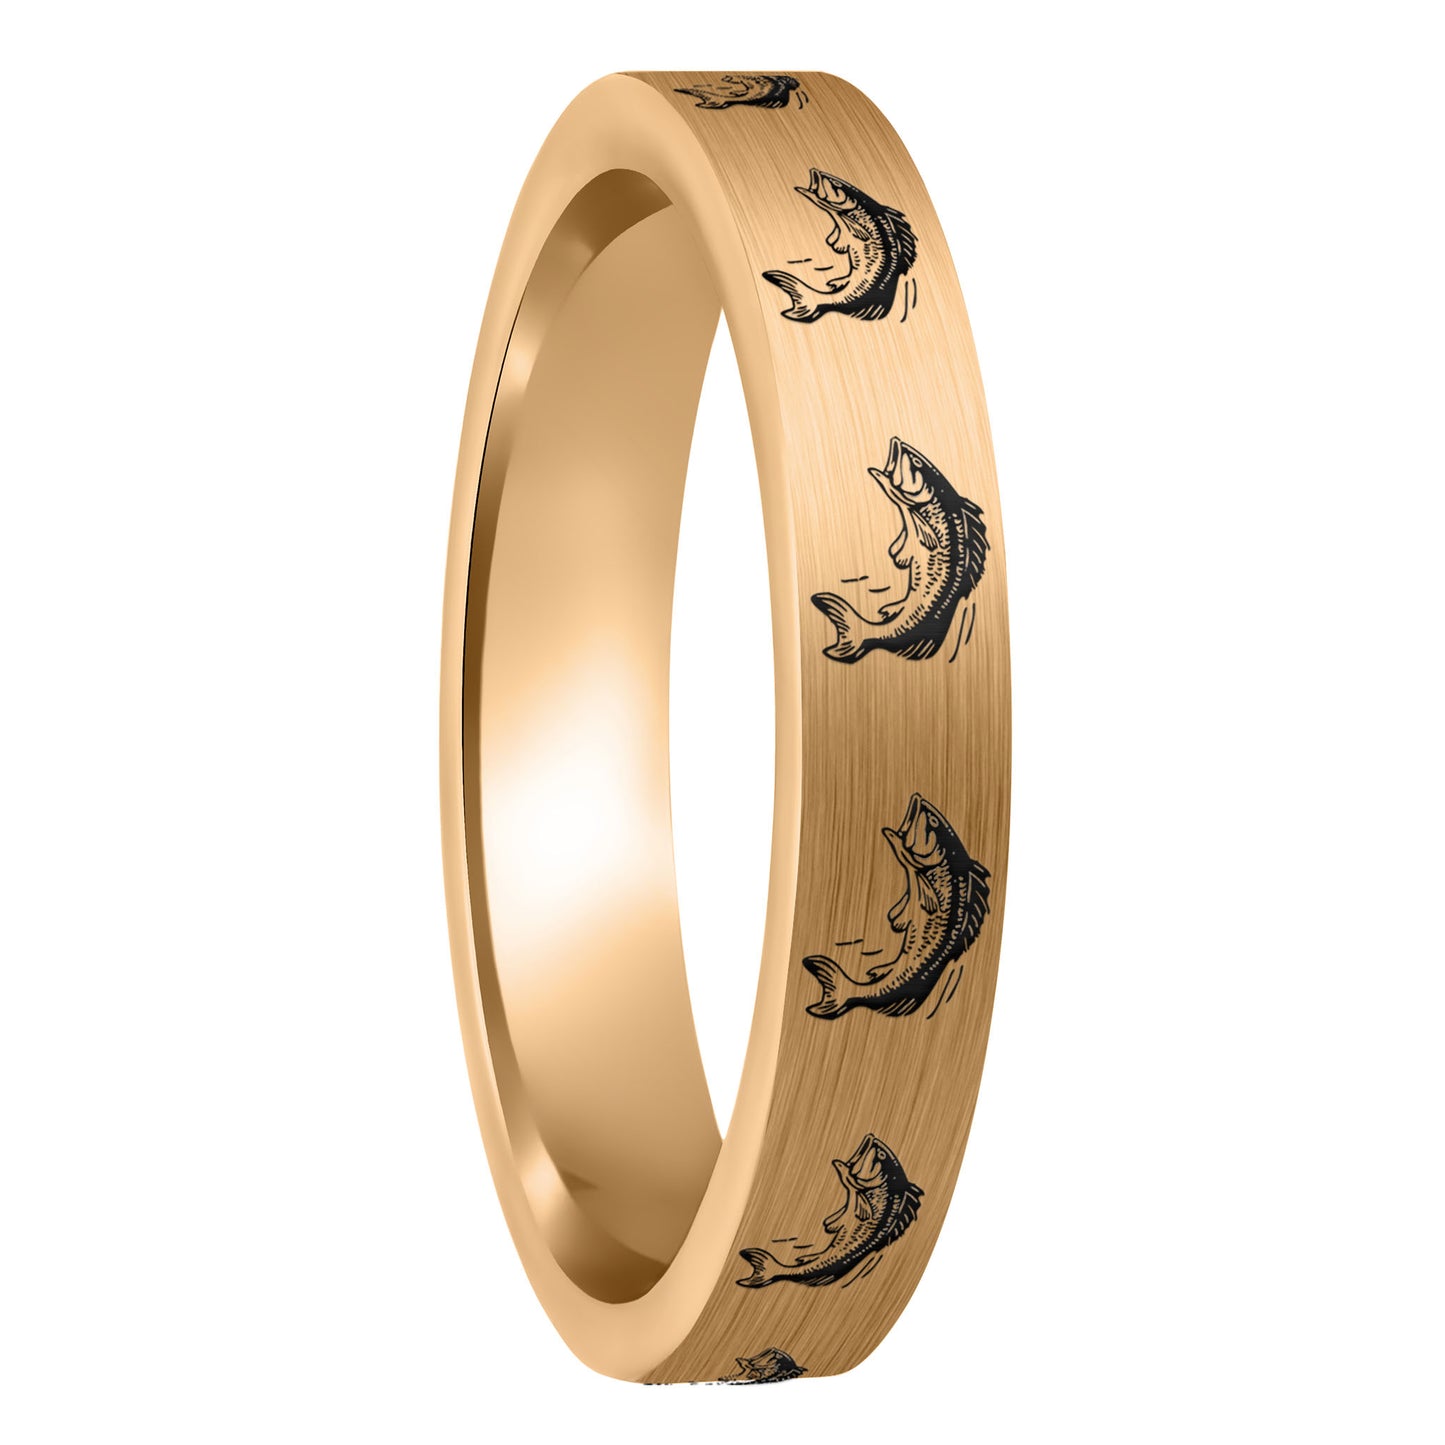 A bass fish brushed rose gold tungsten women's wedding band displayed on a plain white background.